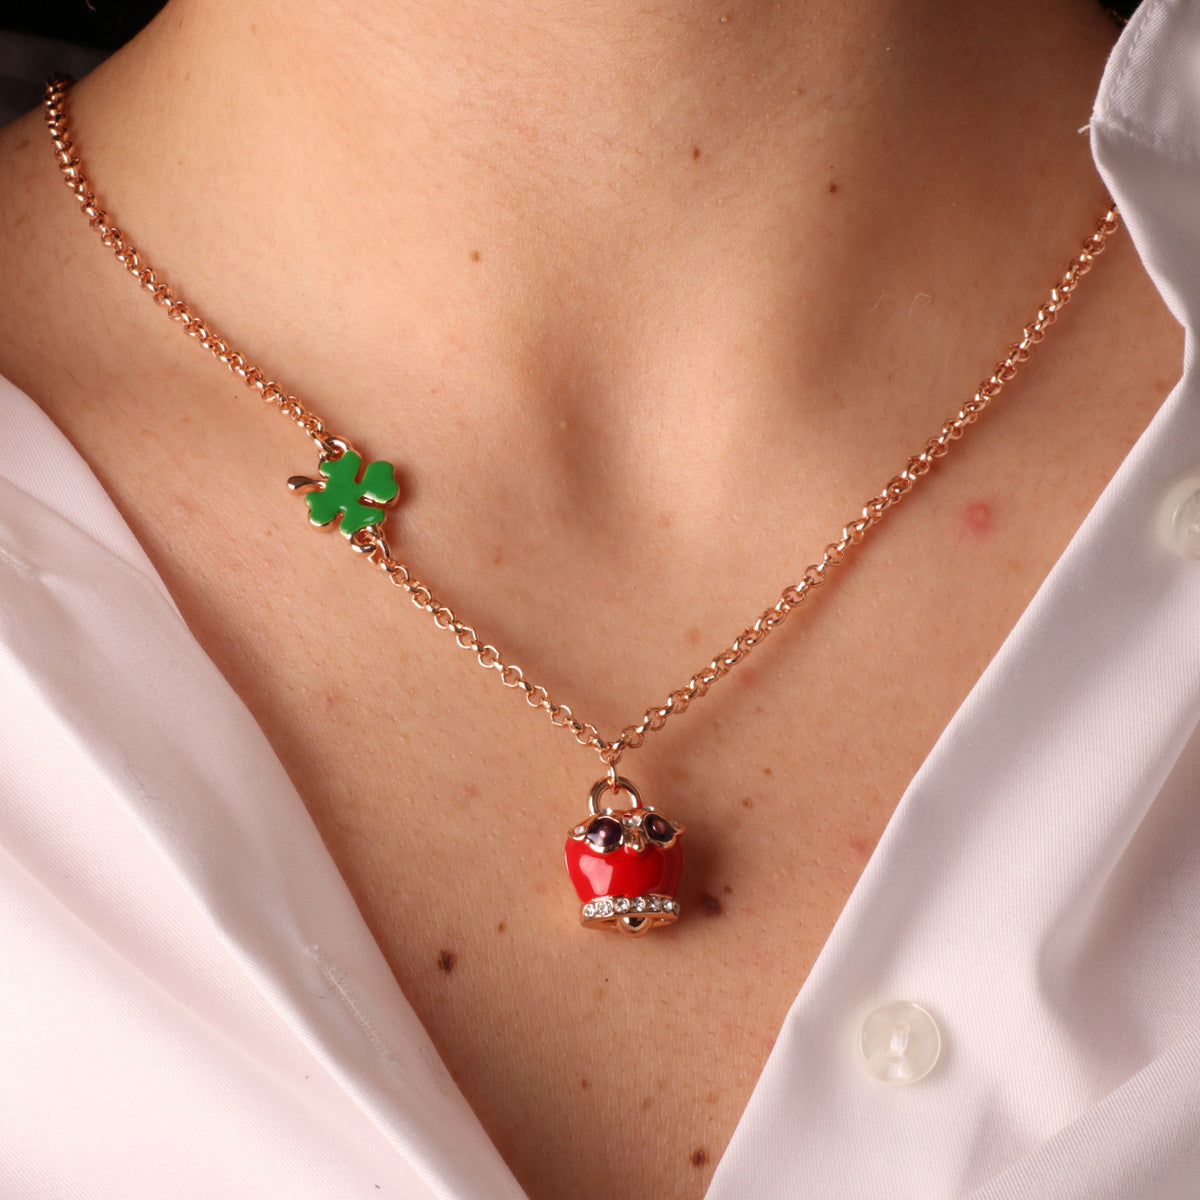 Metal necklace with four -leaf clover and owl charming bell with red nail polish and white crystals